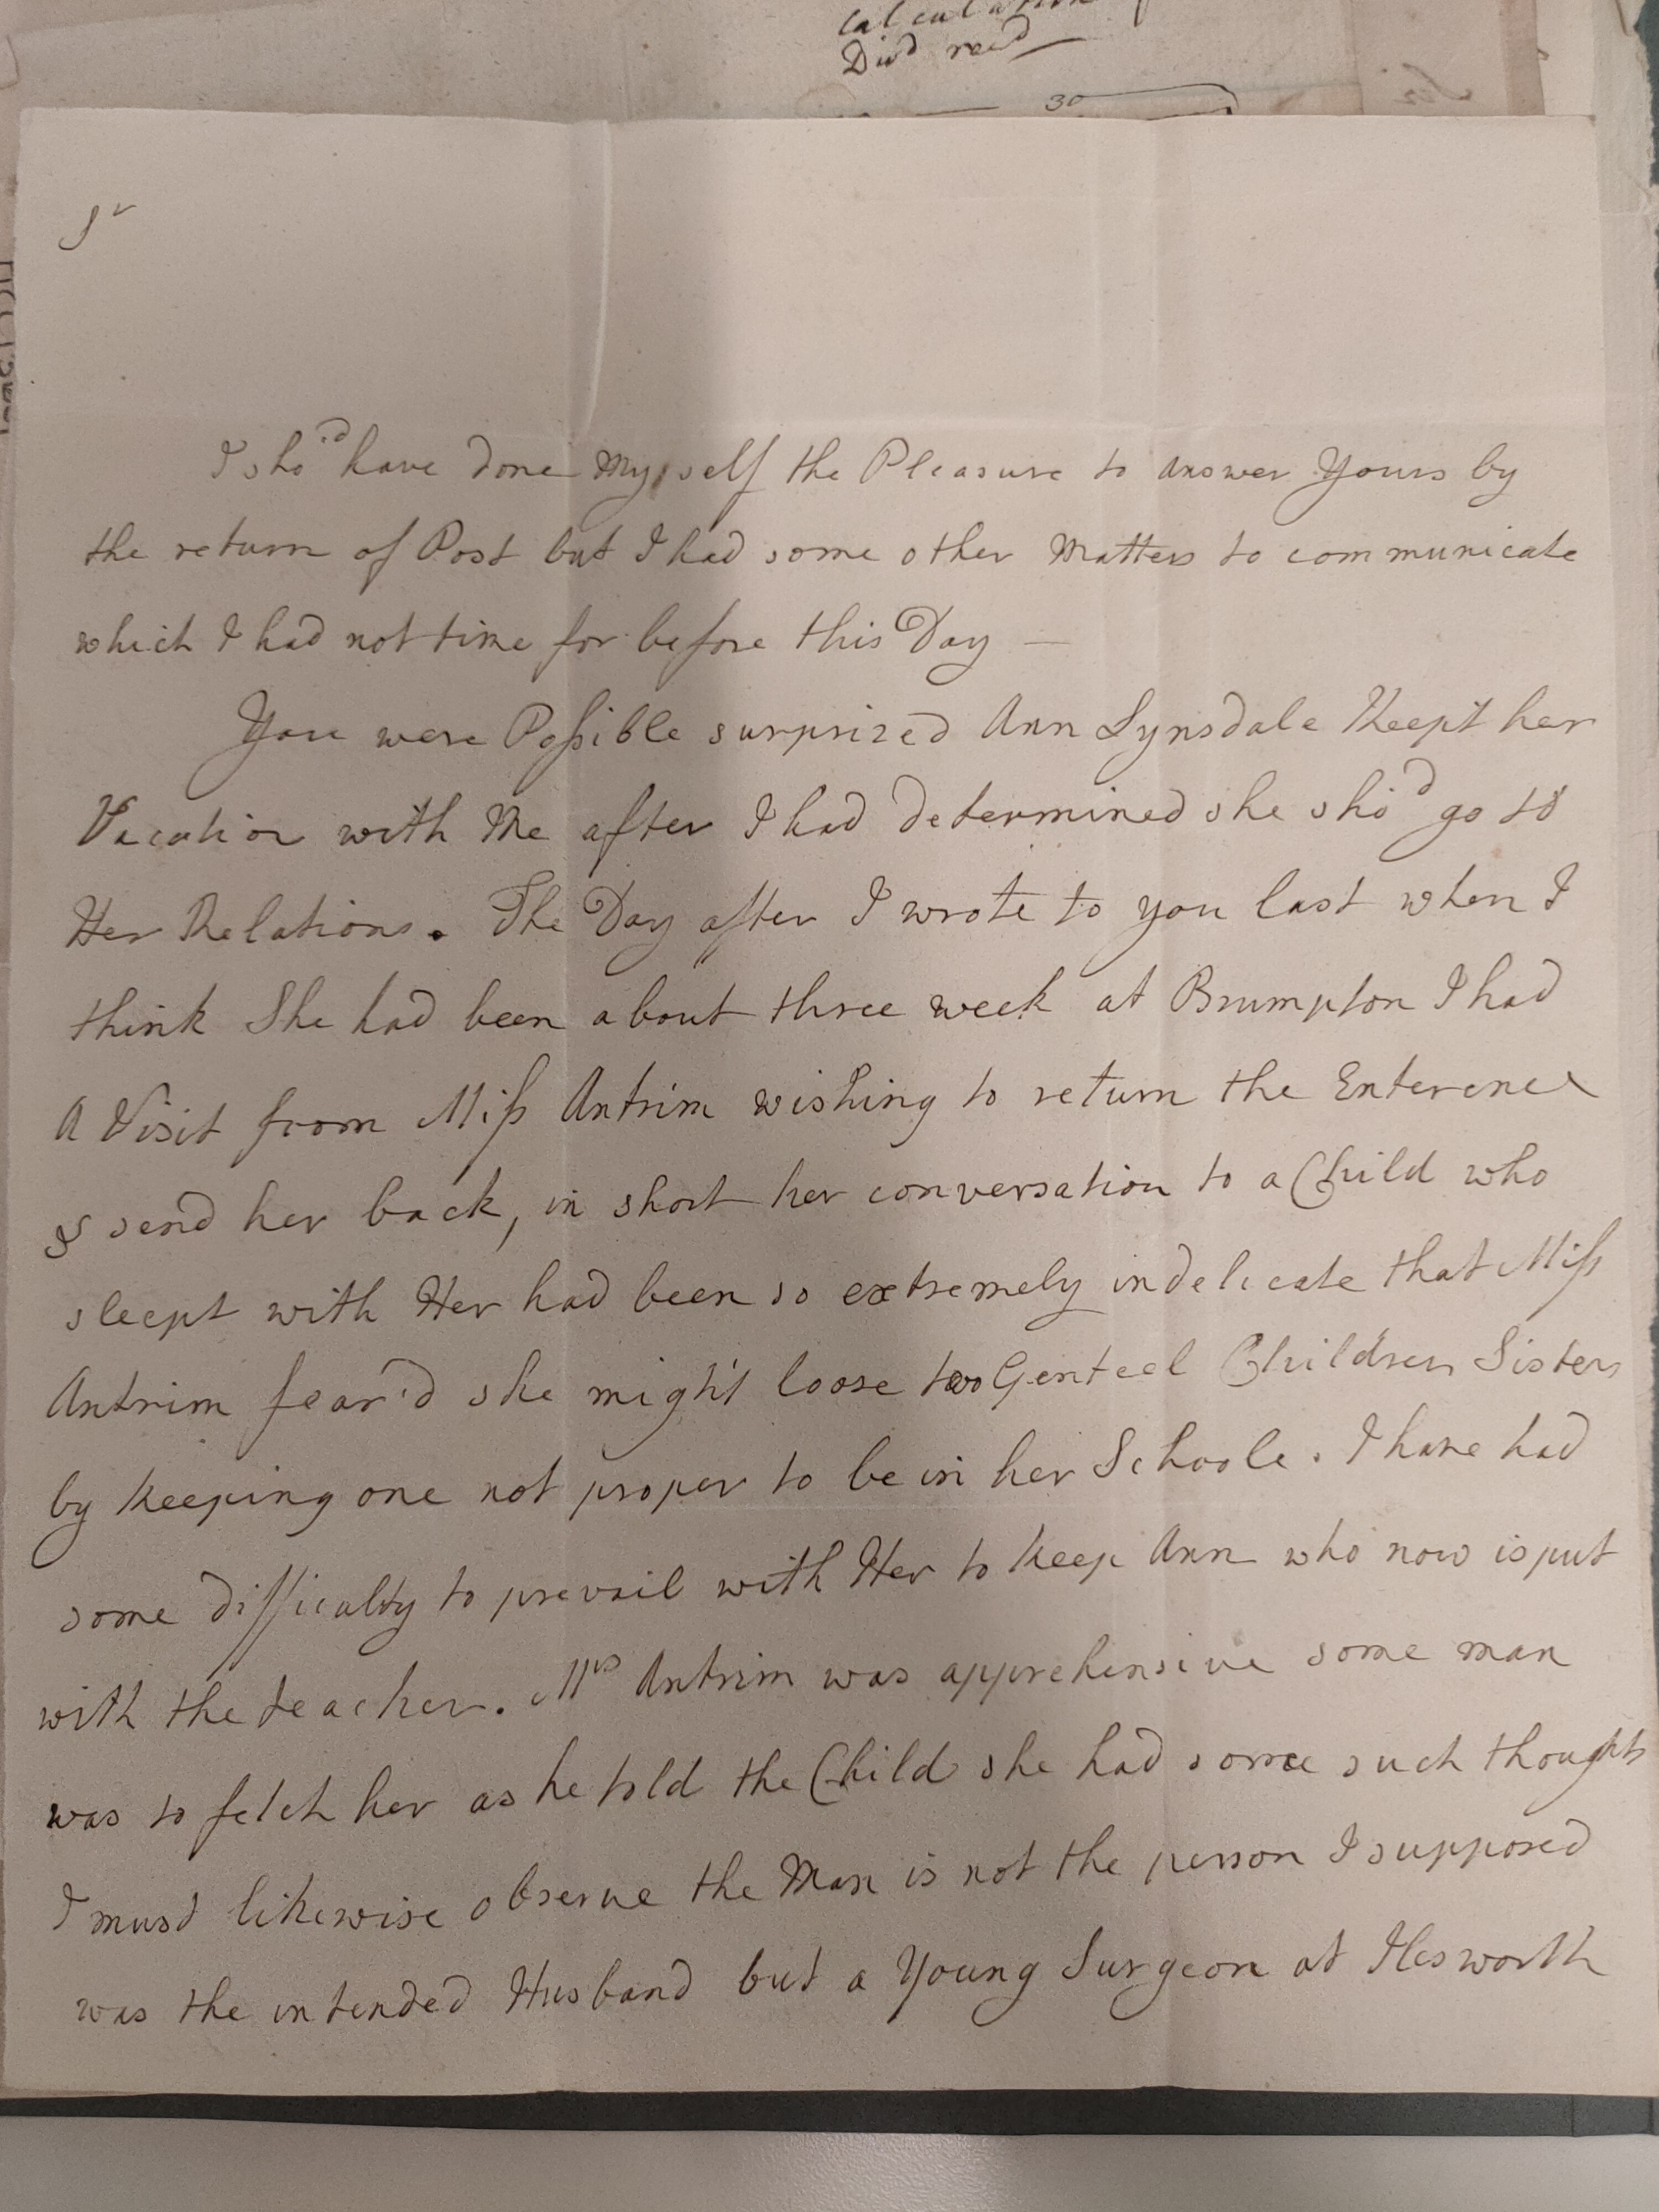 Image #1 of letter: Elizabeth Lister to James Clitherow Esq, Undated, 1800